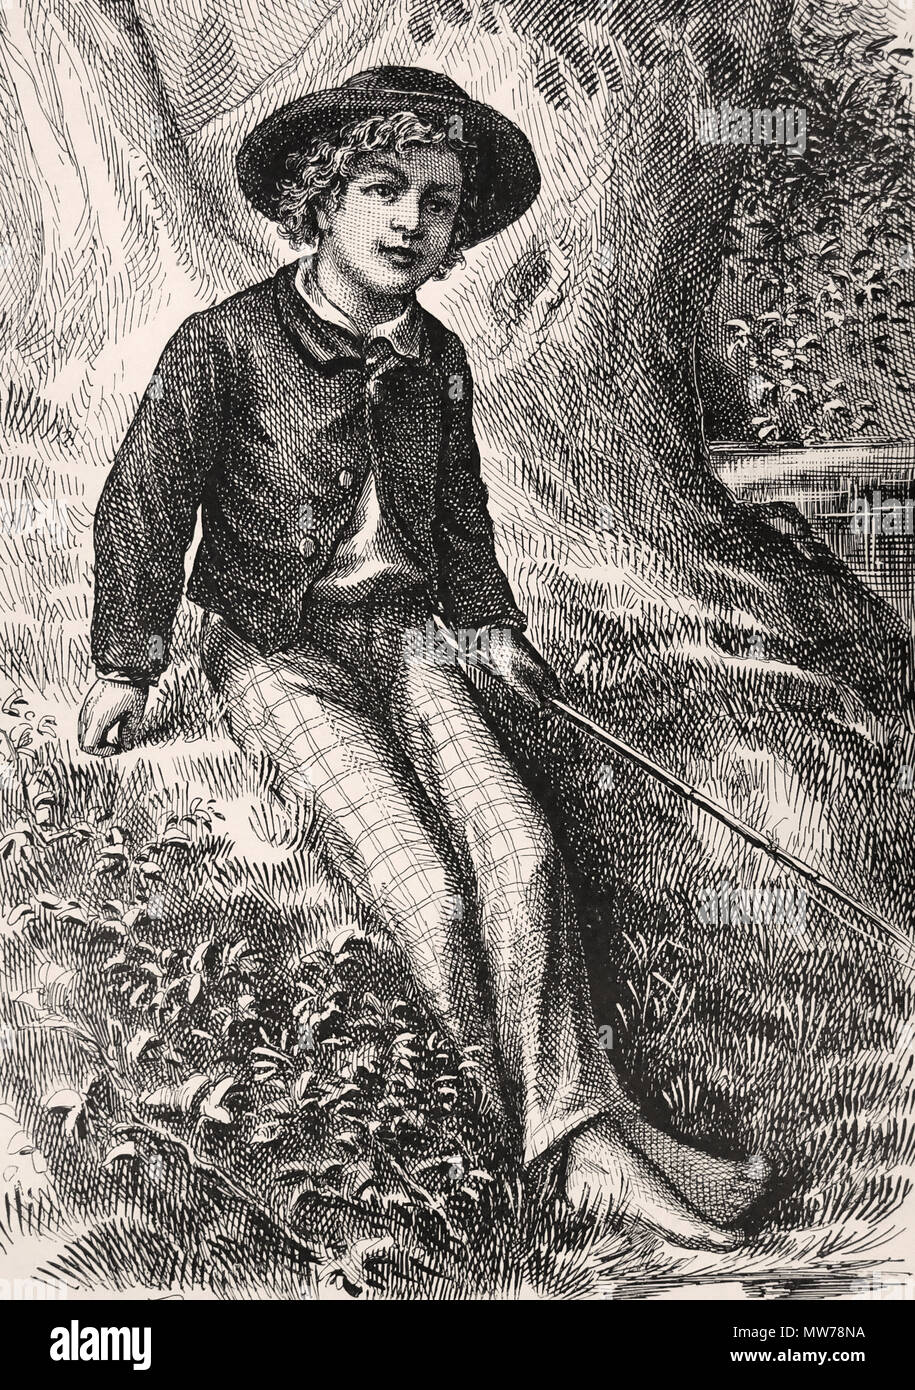 Frontispiece in 'The Adventures of Tom Sawyer' by Mark Twain. Hartford: The American Publishing Co., 1876. First Printing Stock Photo